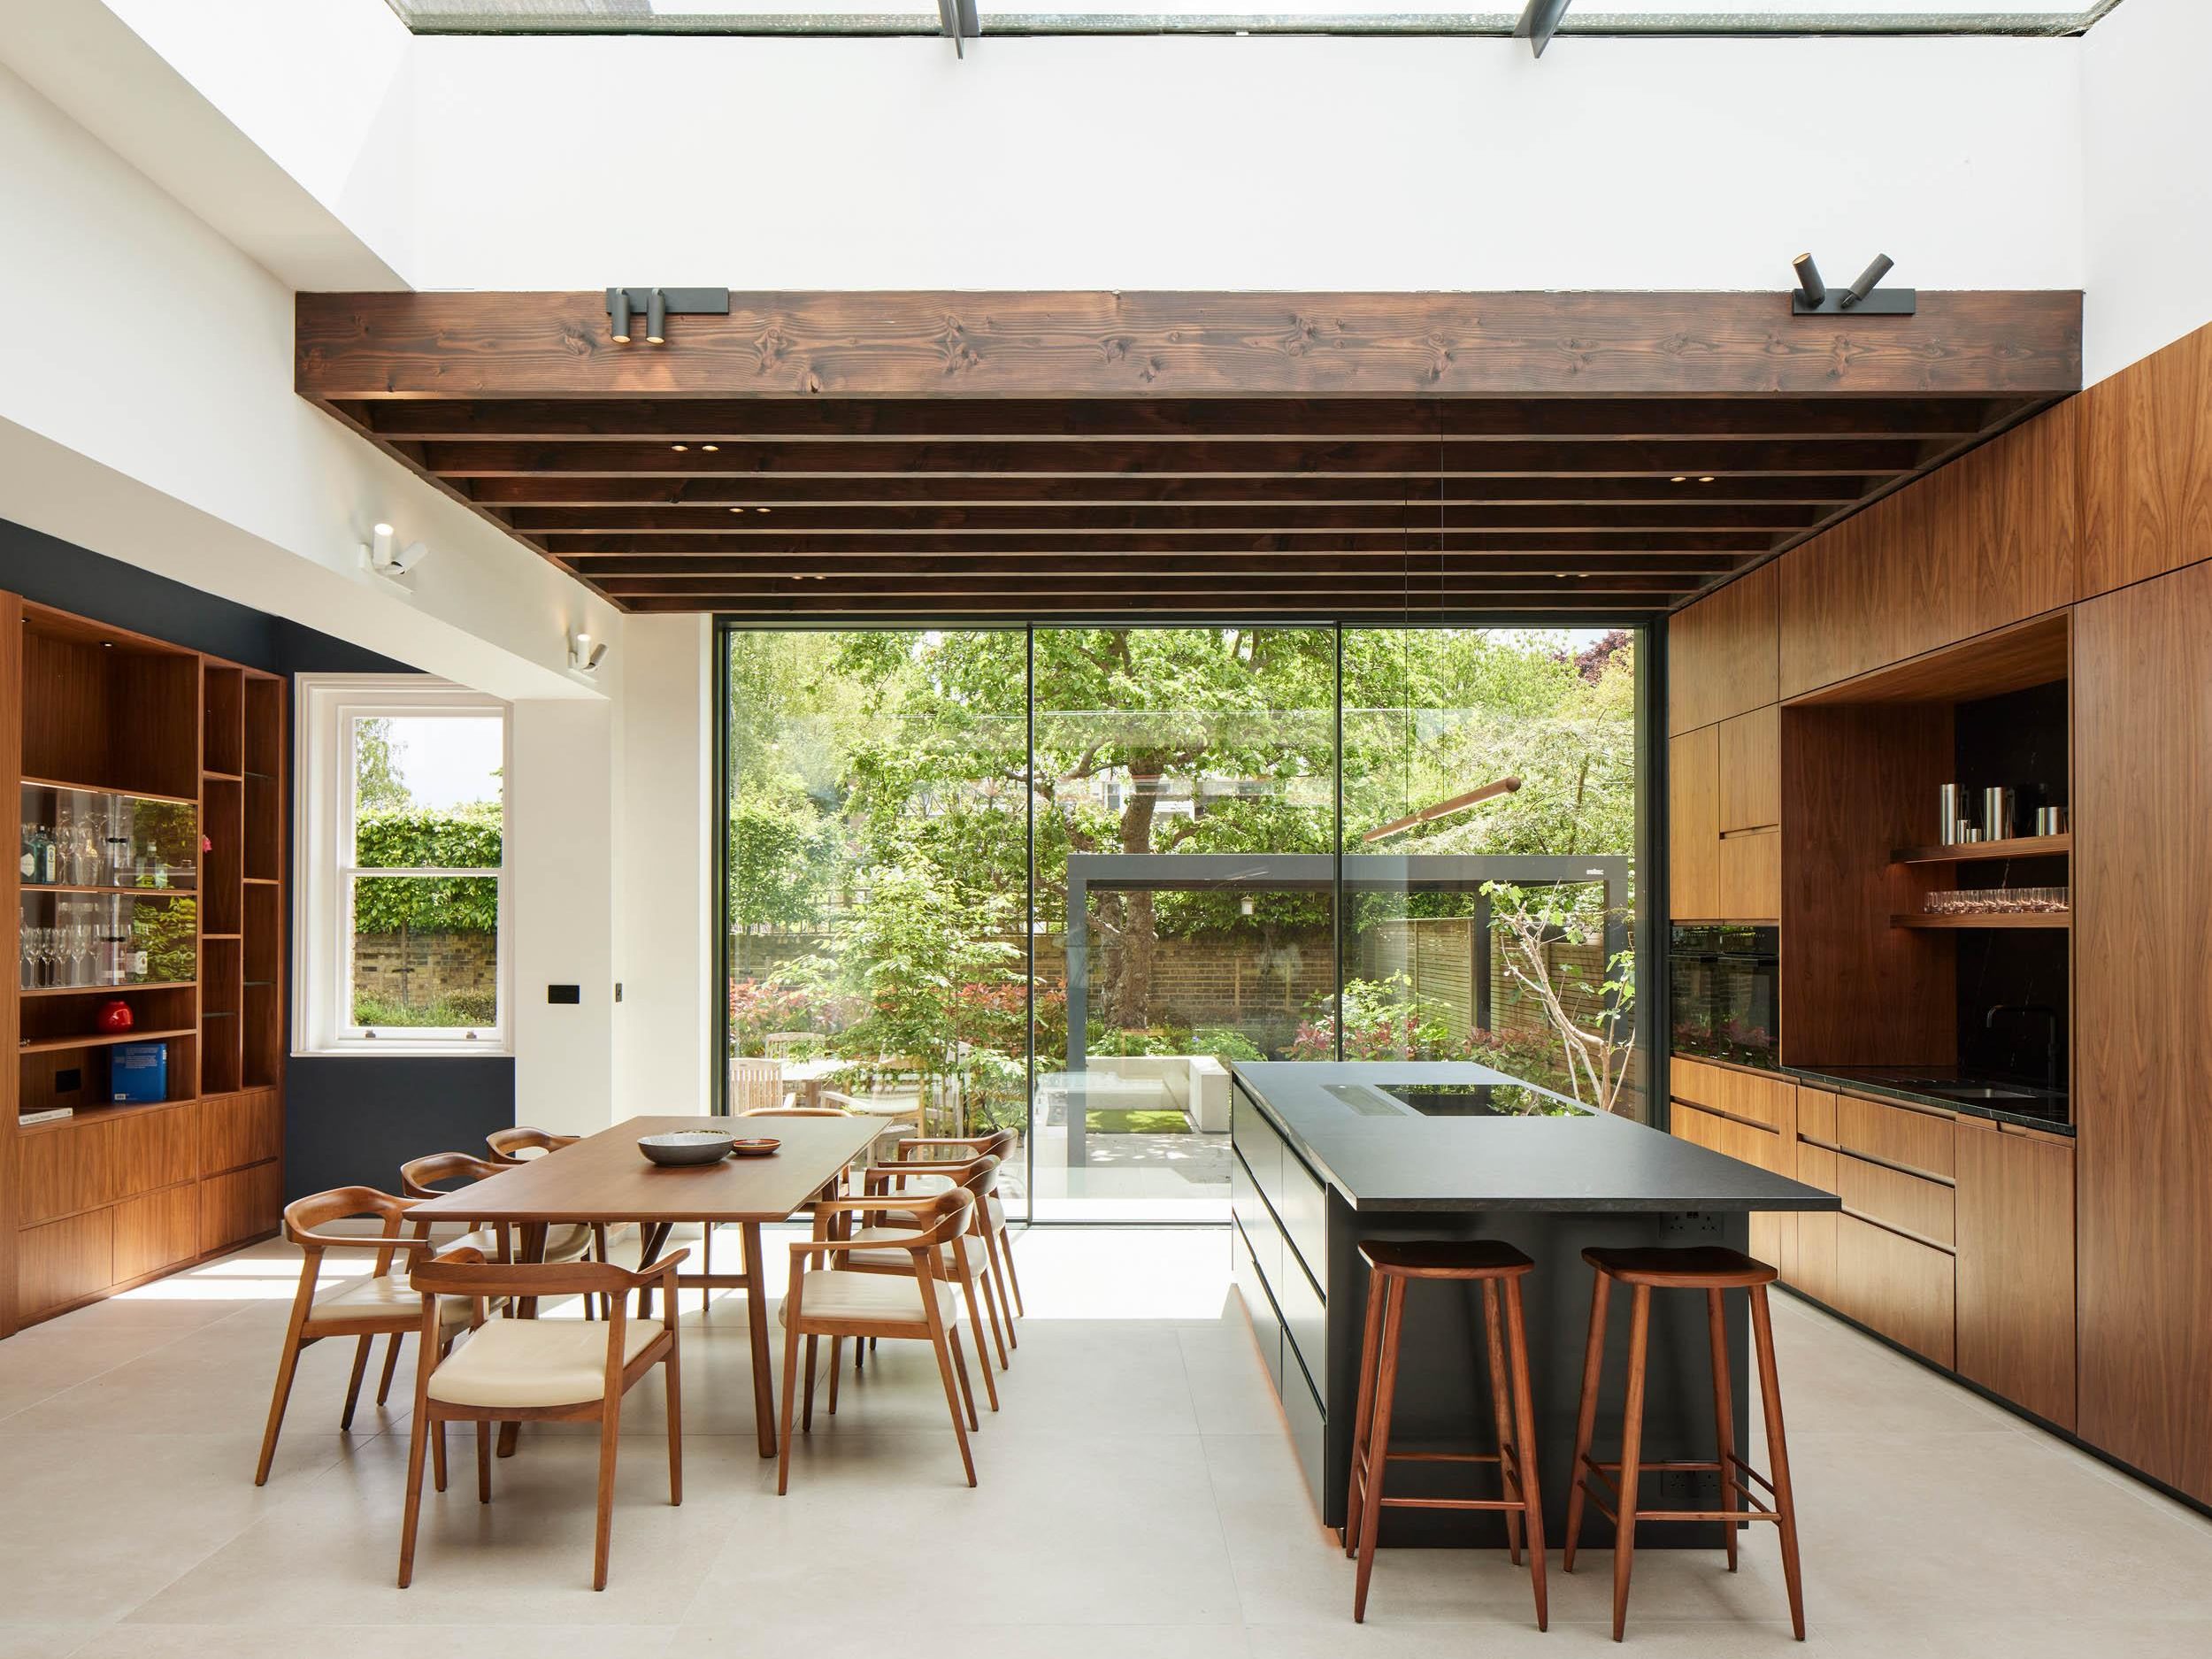 Contemporary kitchen and dining area with views to the garden | cdc studio cambridge architects